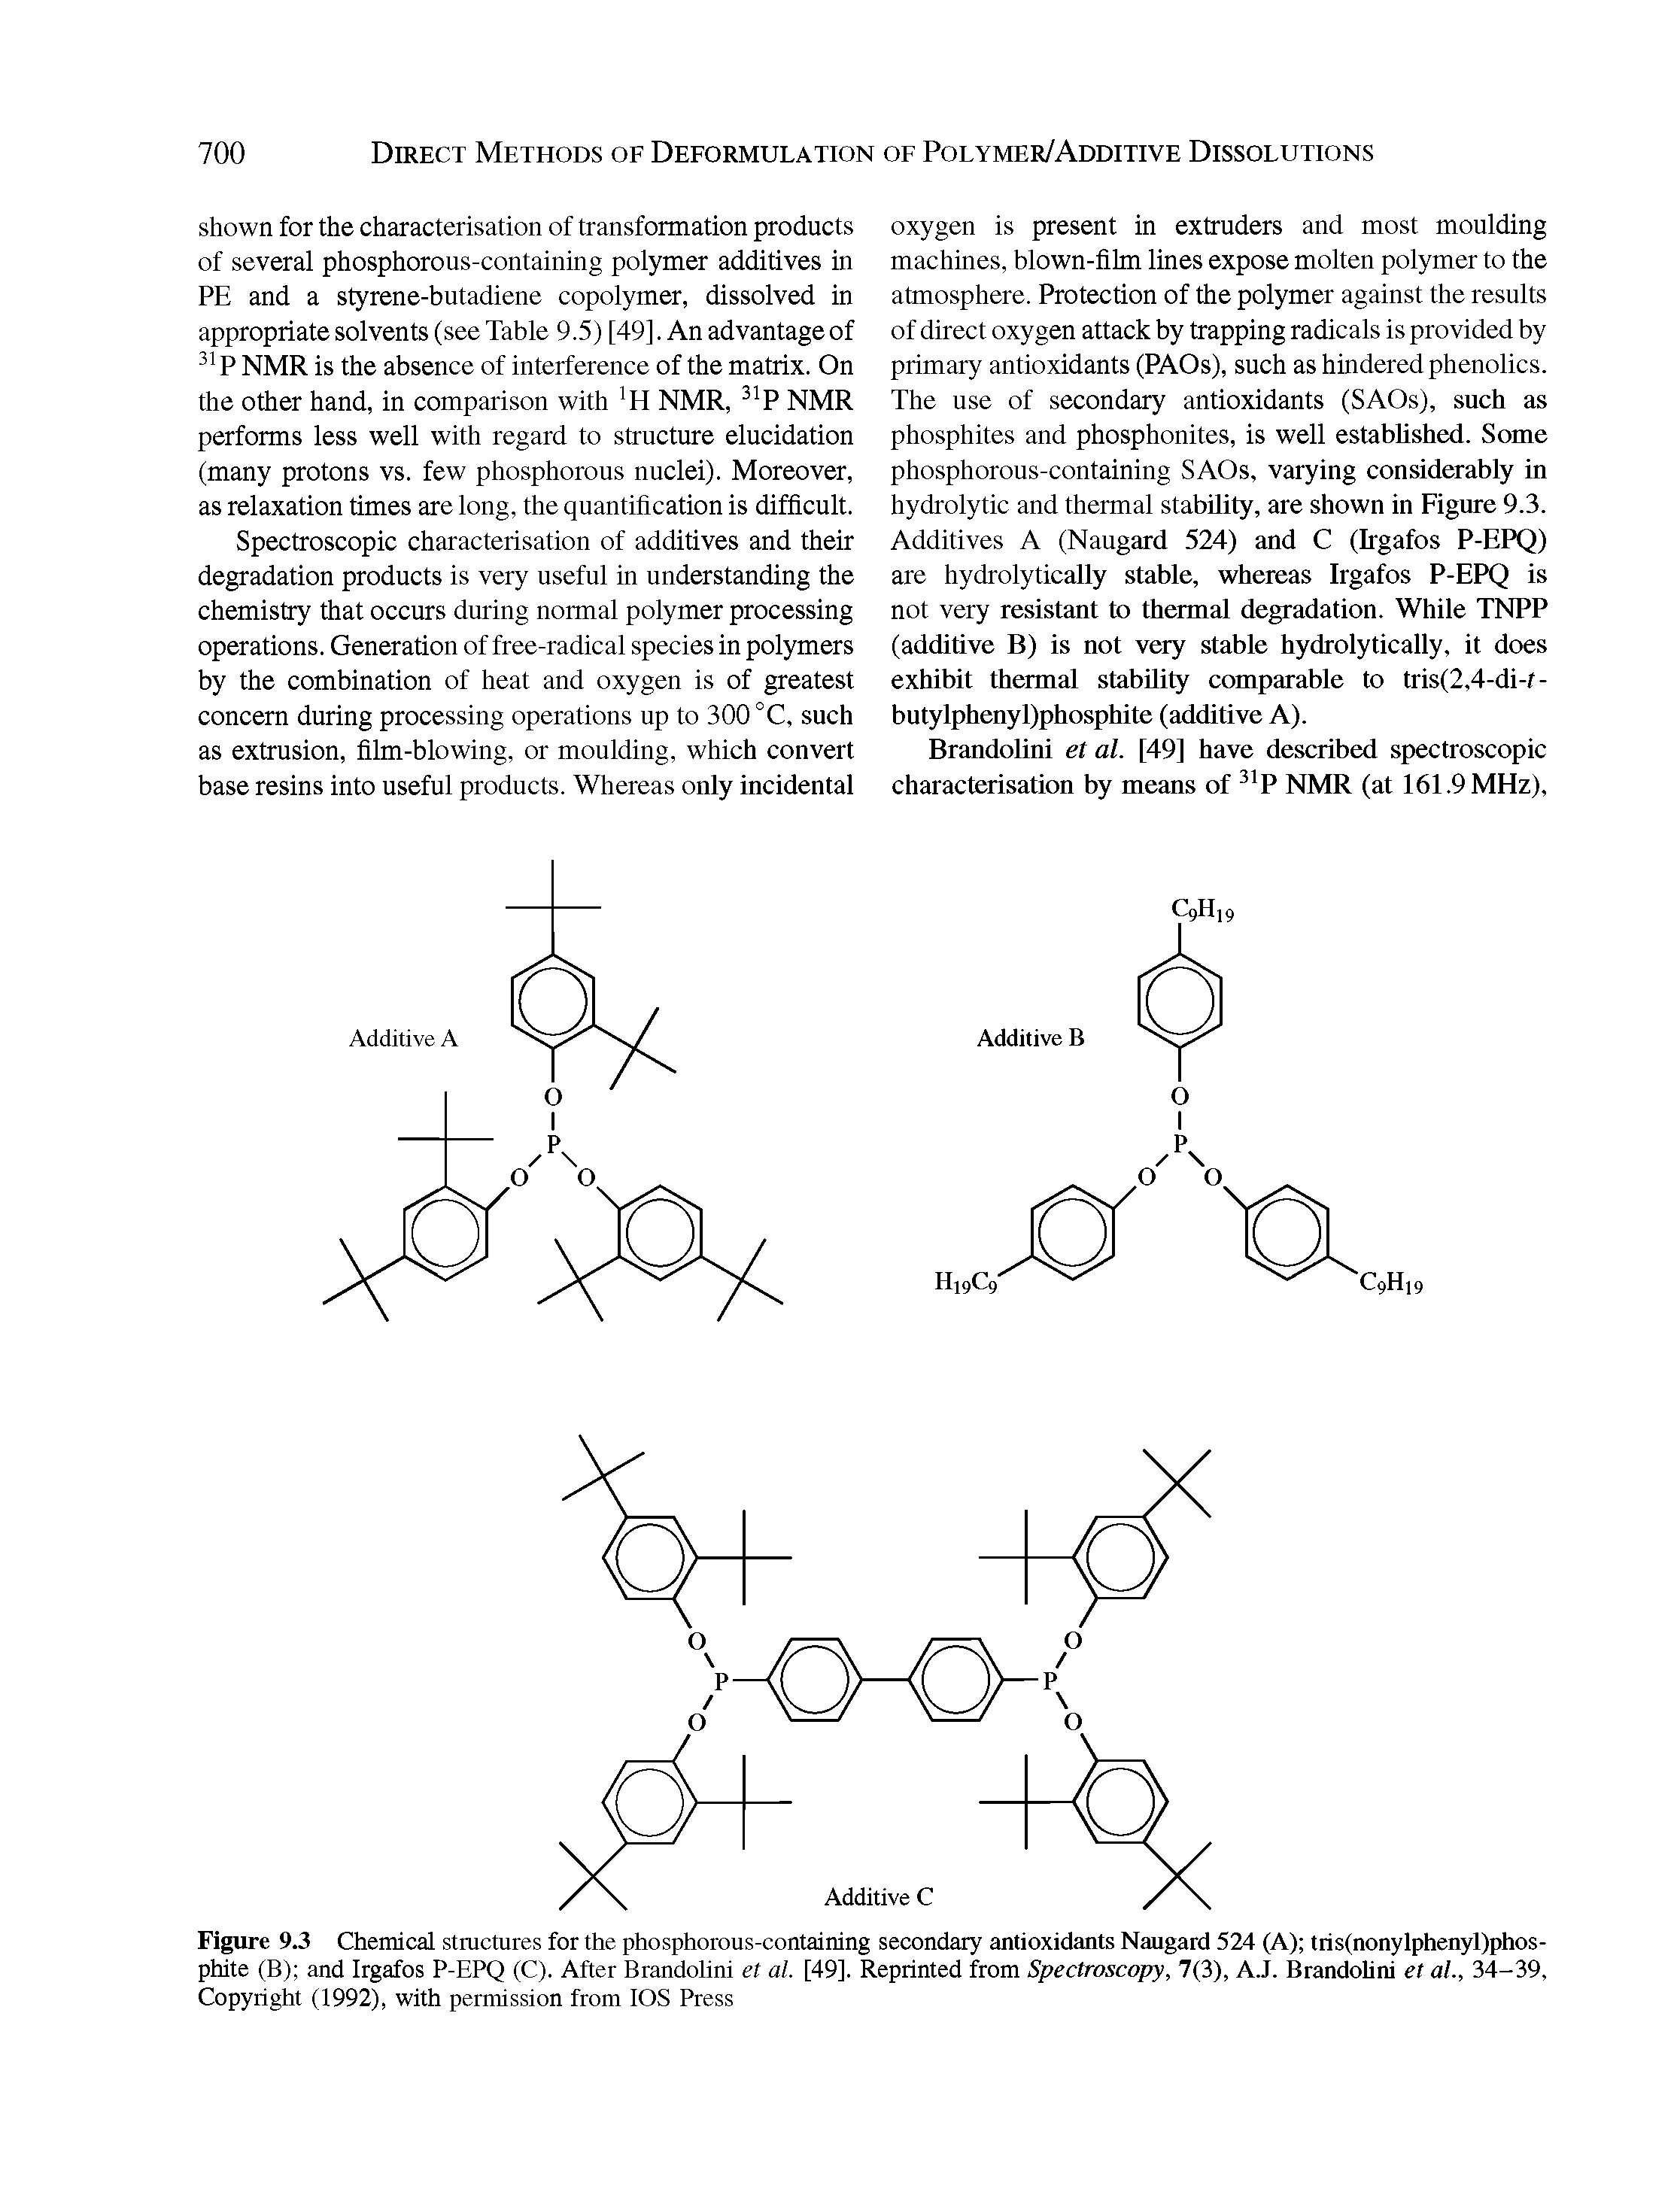 Figure 9.3 Chemical stmctures for the phosphorous-containing secondary antioxidants Naugard 524 (A) tris(nonylphenyl)phos-phite (B) and Irgafos P-EPQ (C). After Brandolini et al. [49]. Reprinted from Spectroscopy, 7(3), AJ. Brandolini et al., 34-39, Copyright (1992), with permission from IOS Press...